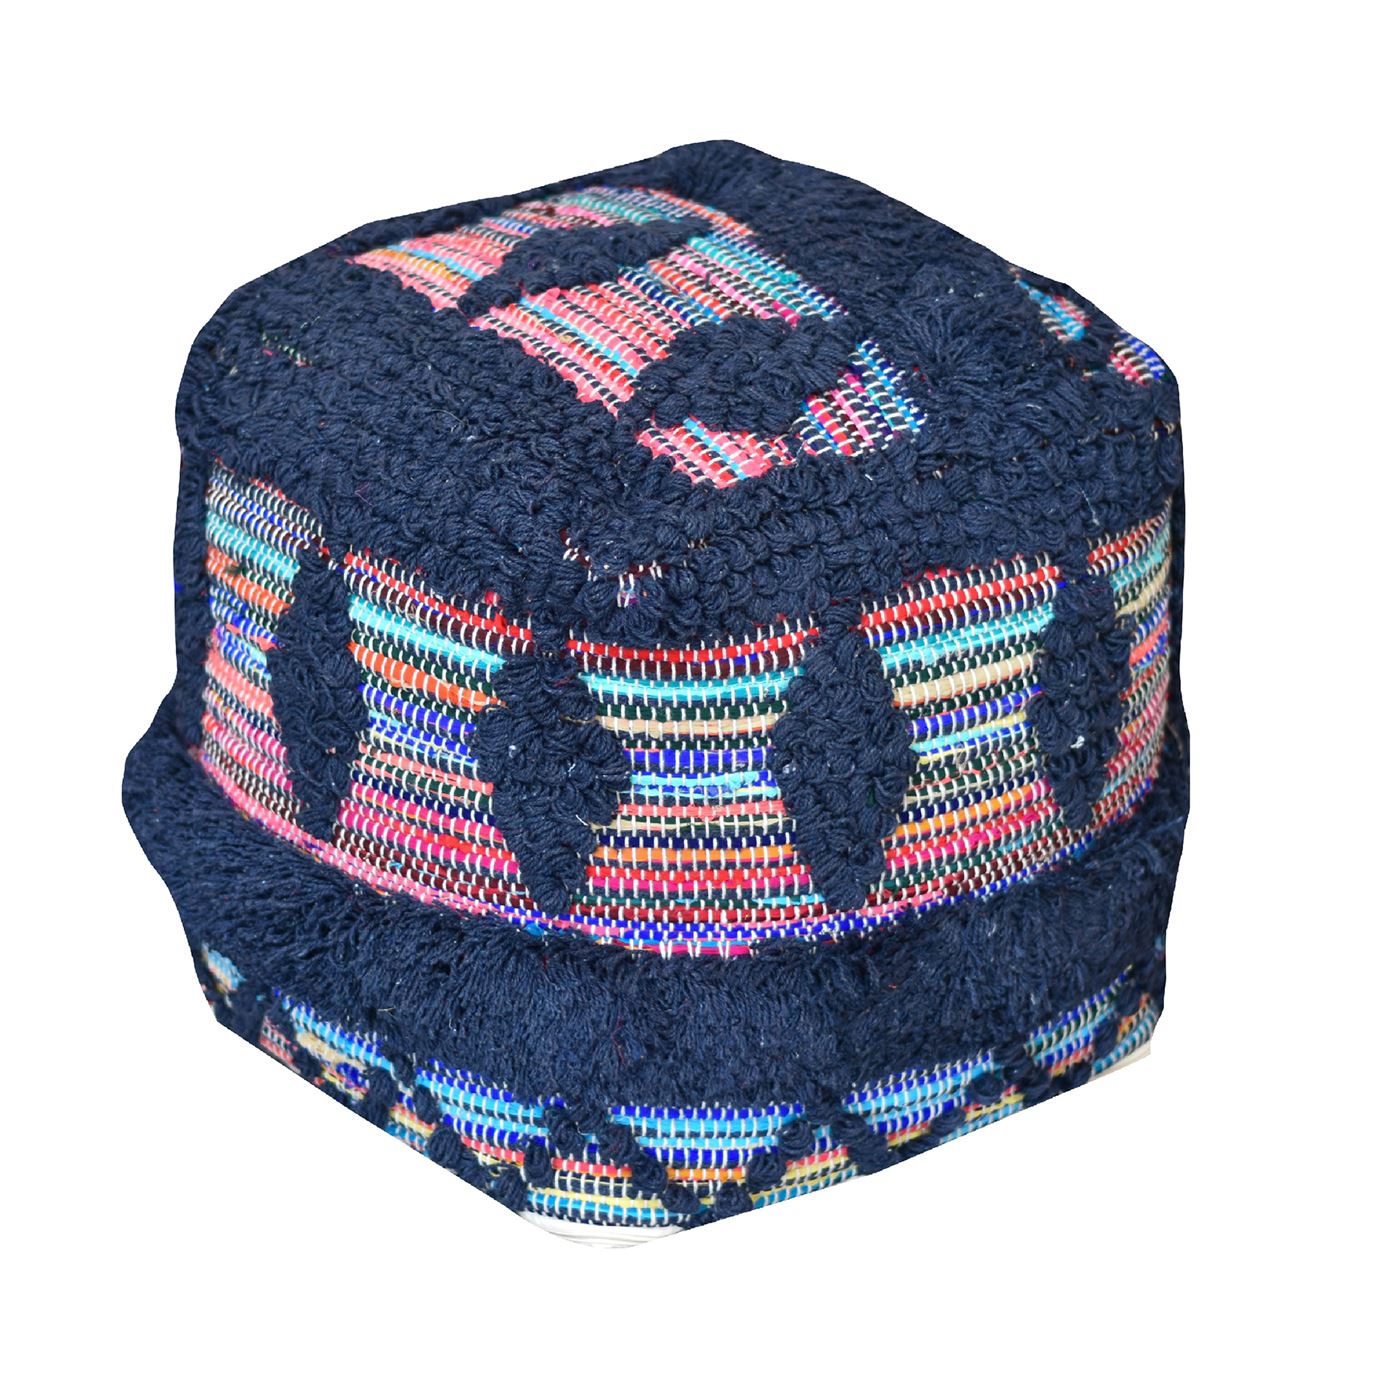 Wexford Pouf, Cotton/ Recycled Fabric, Charcoal/ Multi